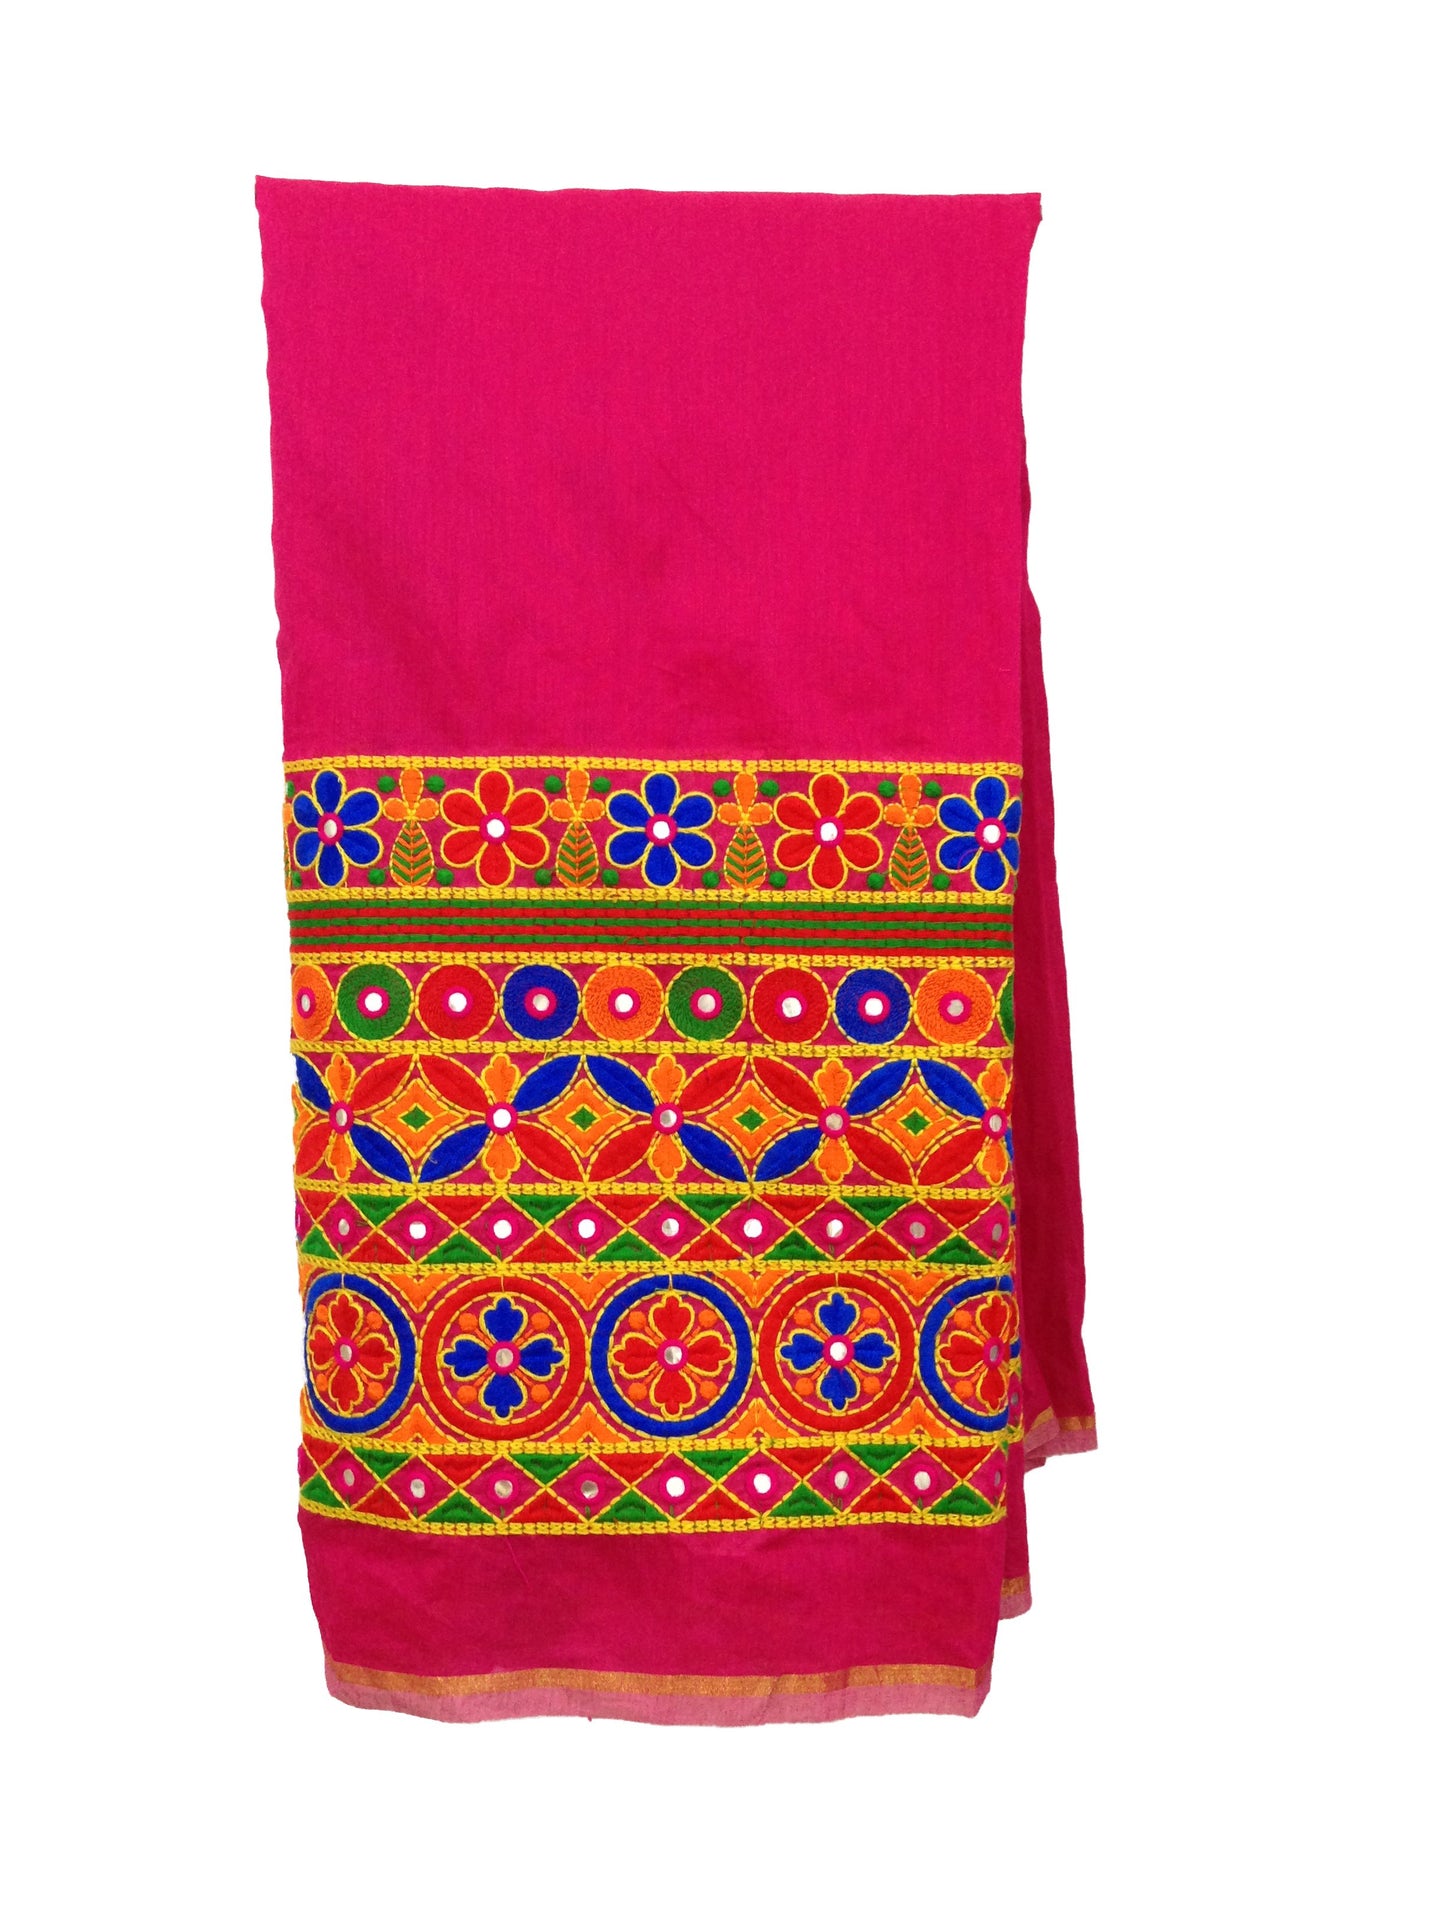 Chanderi Rani Pink Embroidered Fabric Material by the yard